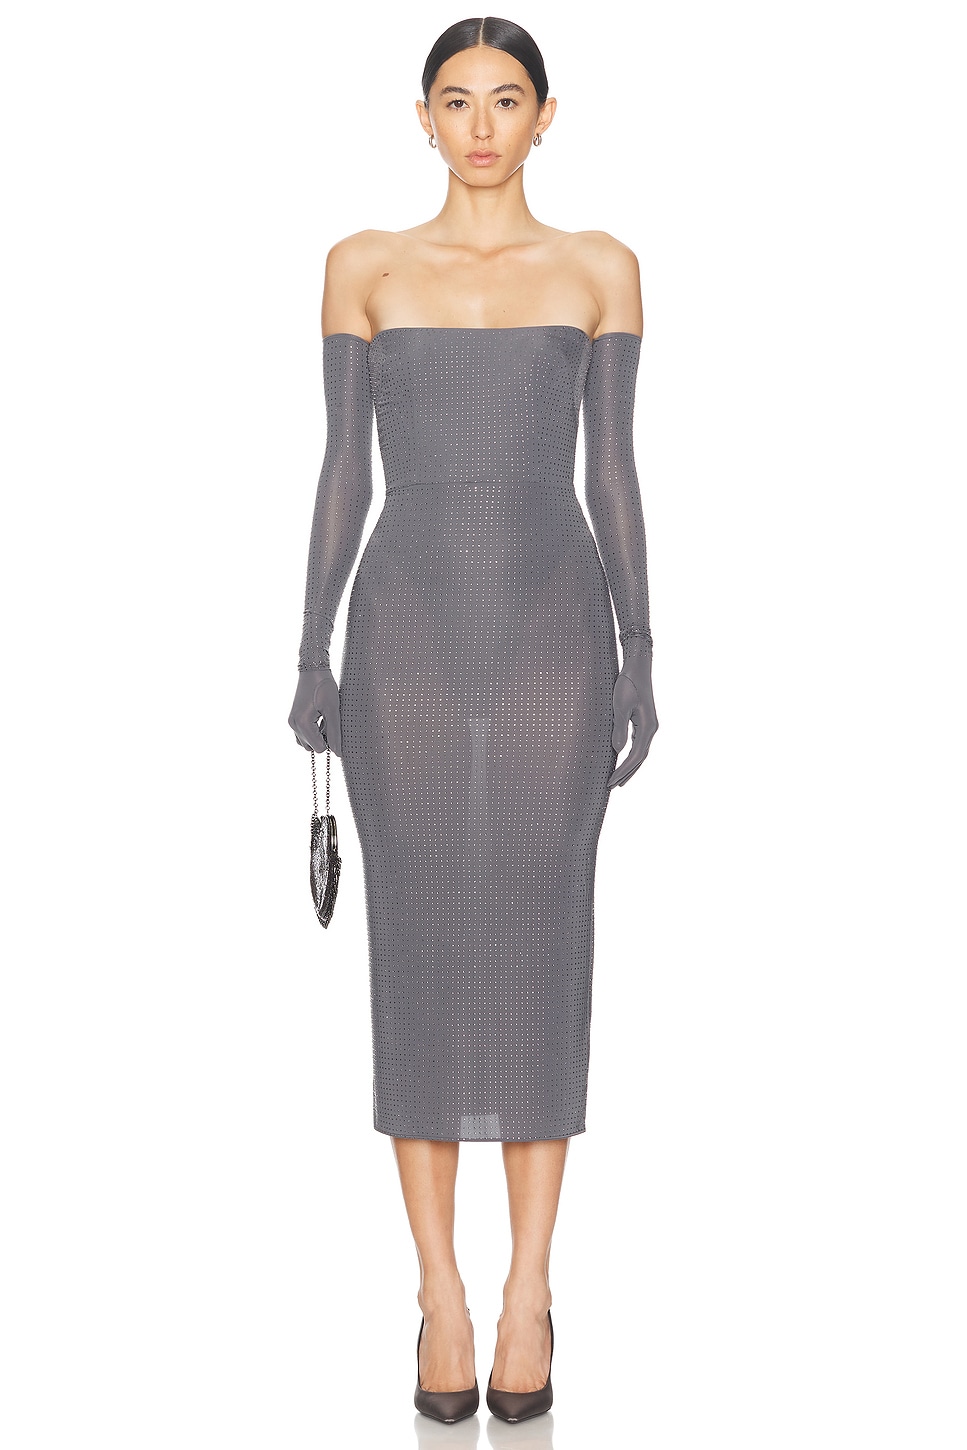 Image 1 of Alex Perry Strapless Crystal Glove Dress in Iron